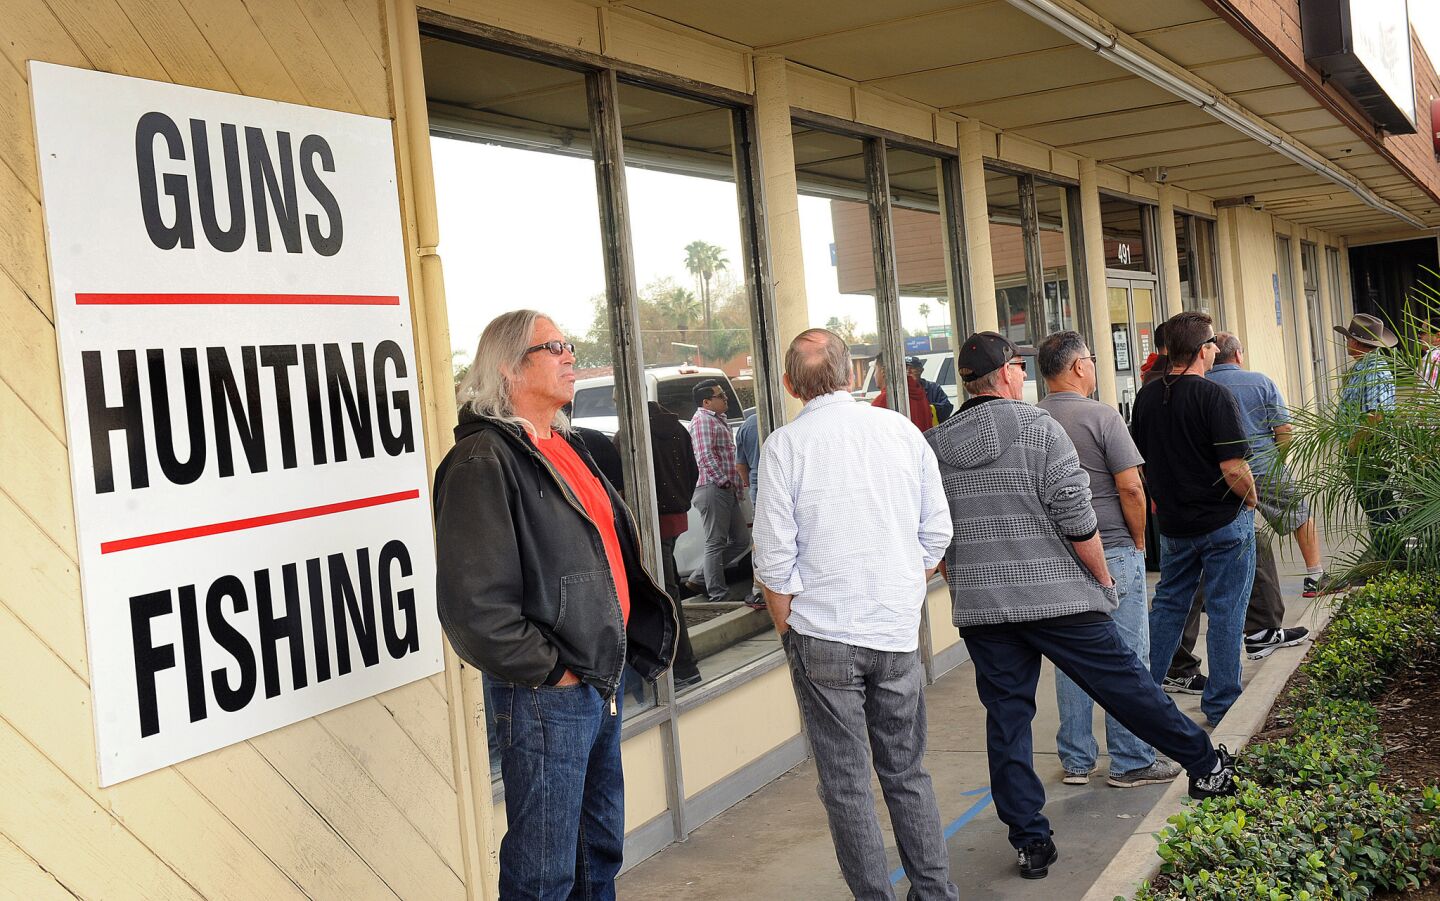 Customers wait for the doors to open at Turner's Outdoorsman in San Bernardino Wednesday morning.